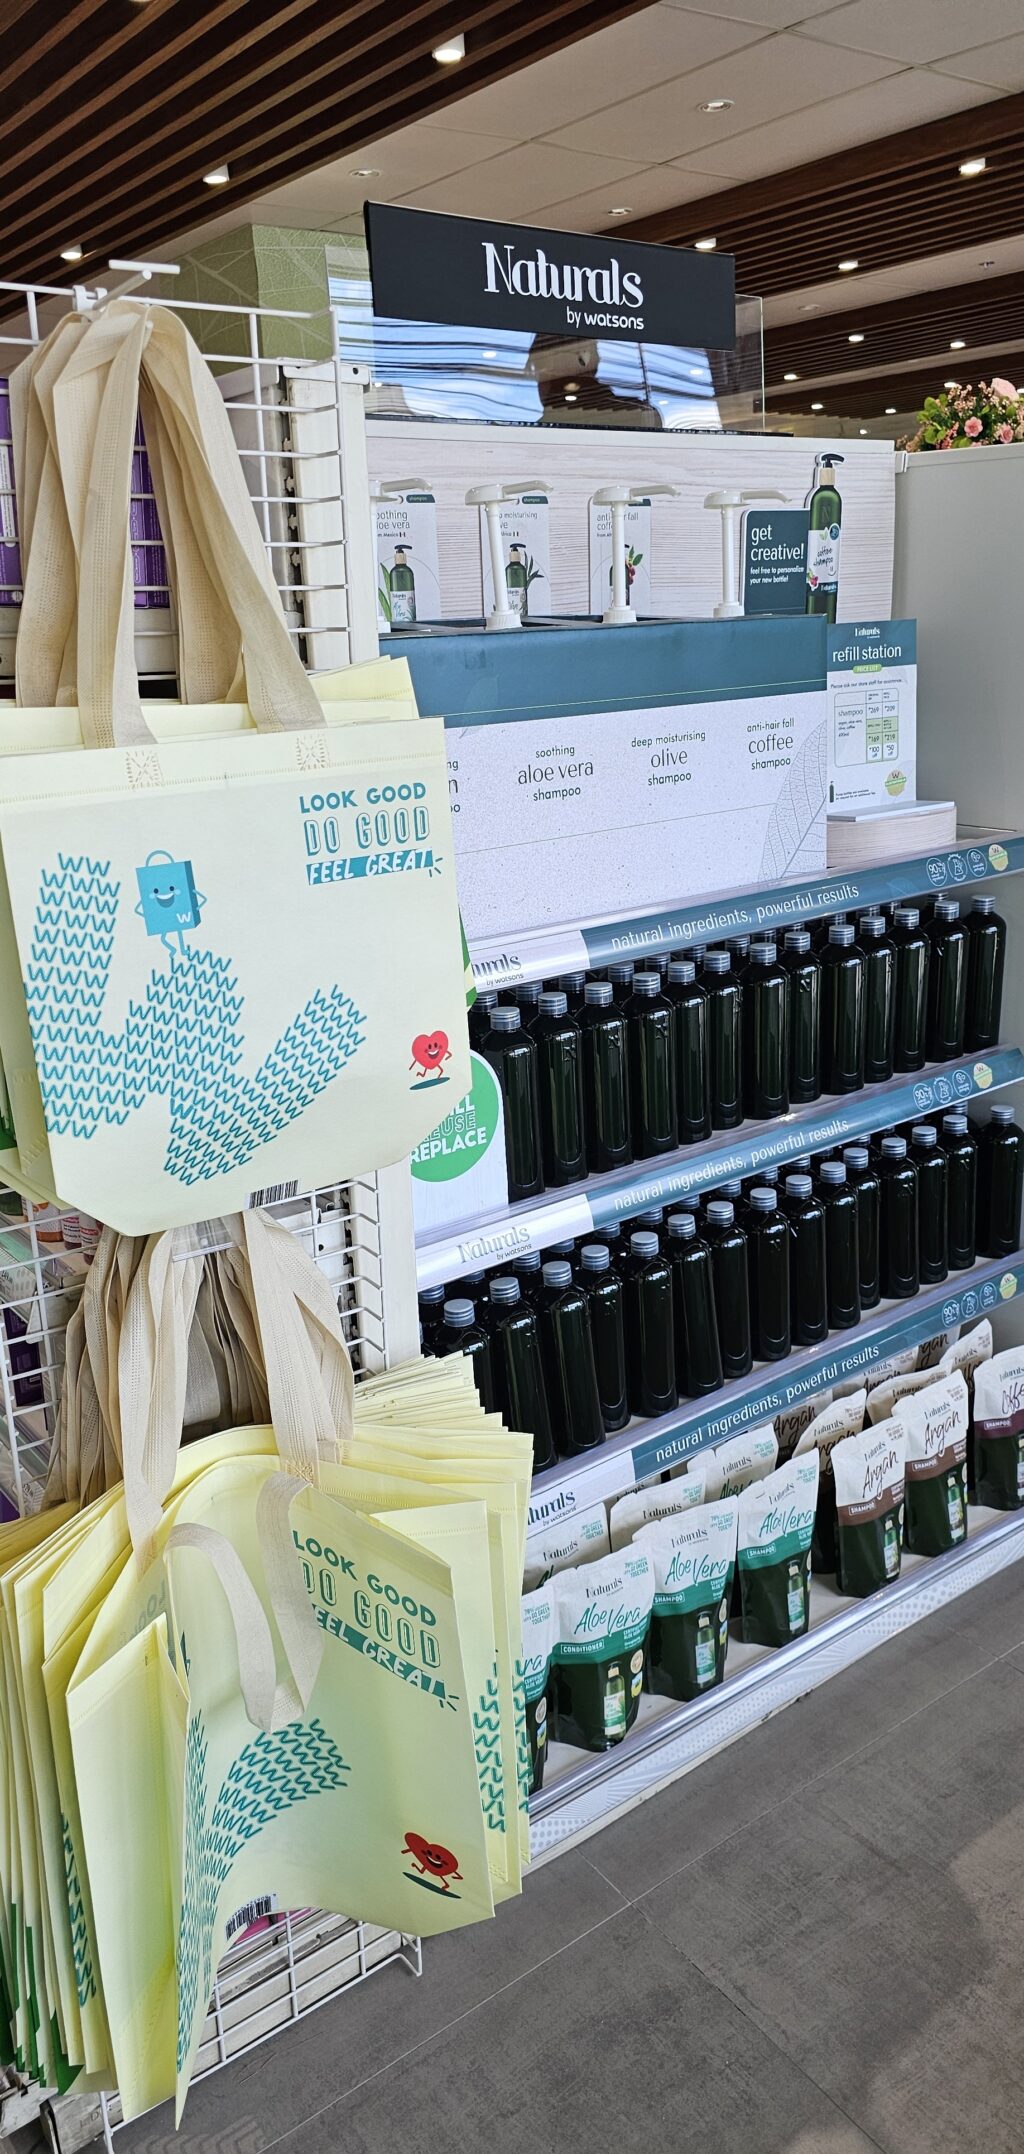 Watsons Greener Store encourages customers to bring reusable shopping bags and practice refilling to promote waste reduction, segregation, and recycling.